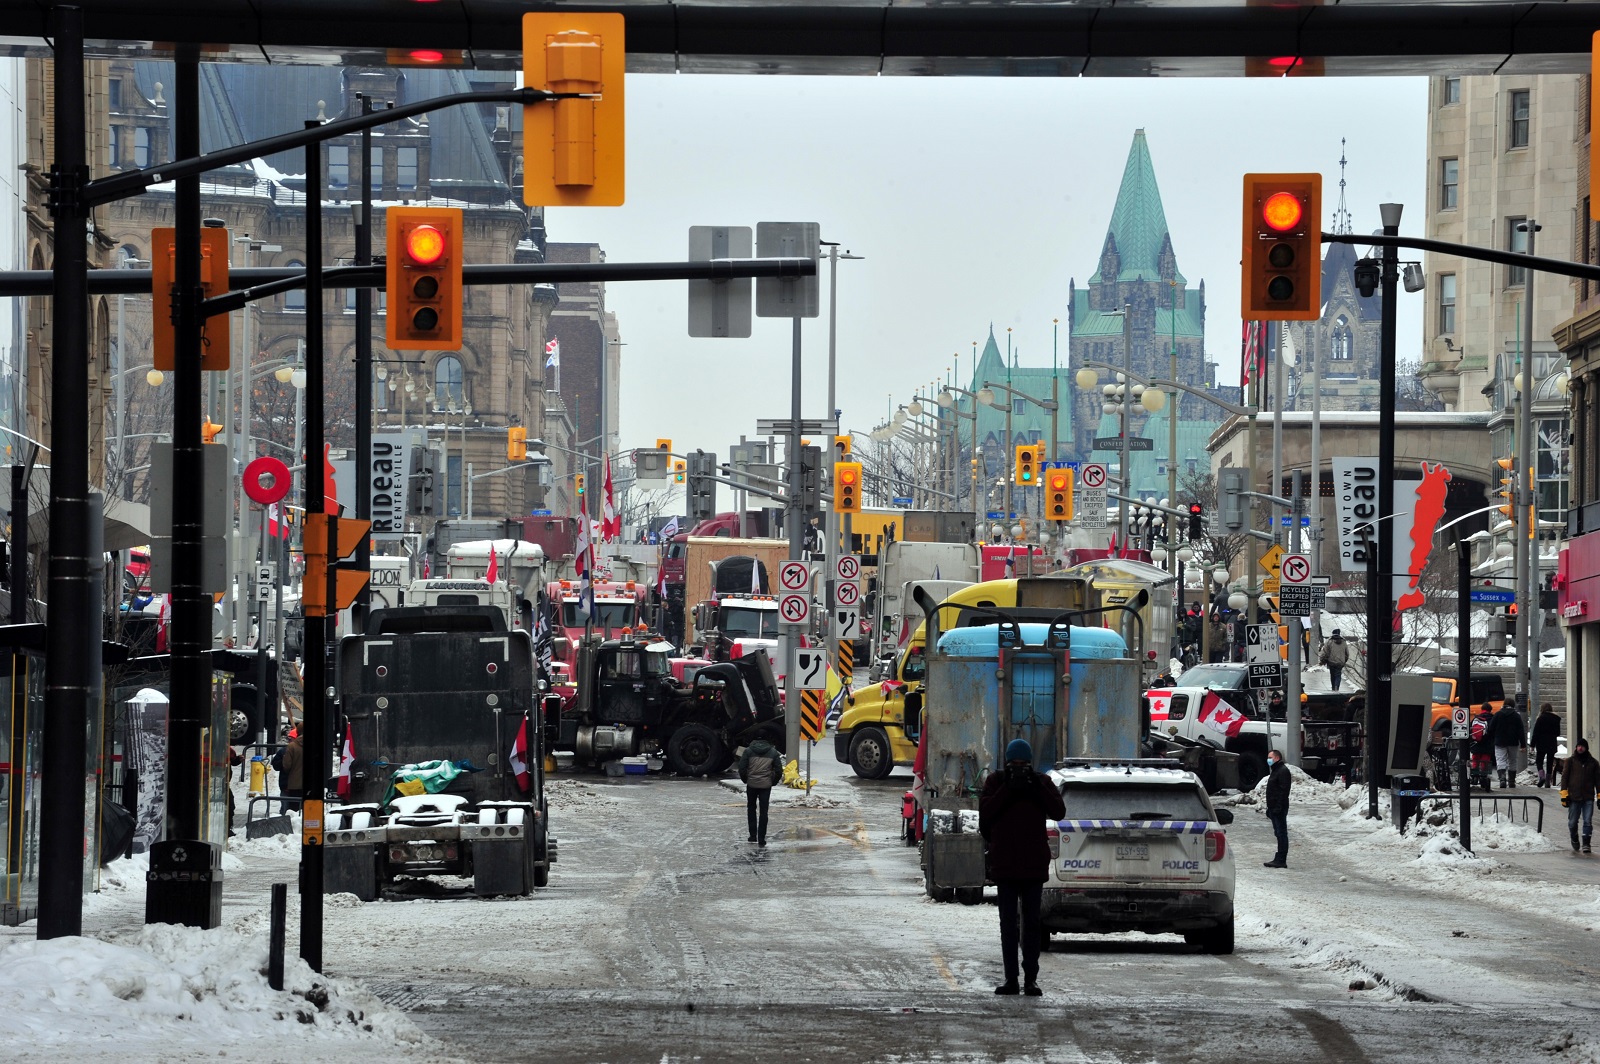 epa09739416 A view of parked trucks as truckers continue to protest the vaccine mandates in in downtown Ottawa, Ontario, Canada, 08 February 2022. Since 29 January 2022, truckers are protesting against the mandate by the Canadian government that truckers be vaccinated against COVID-19 to return to Canada, and was joined by other opponents of the Canadian Prime Minister. A  state of emergency was declared in the city of Ottawa on 06 Febraury 2022 and policemen from Ottawa city, Ontario, and the Federal Royal Canadian Mounted Police (RCMP) are deployed.  EPA/Kadri Mohamed